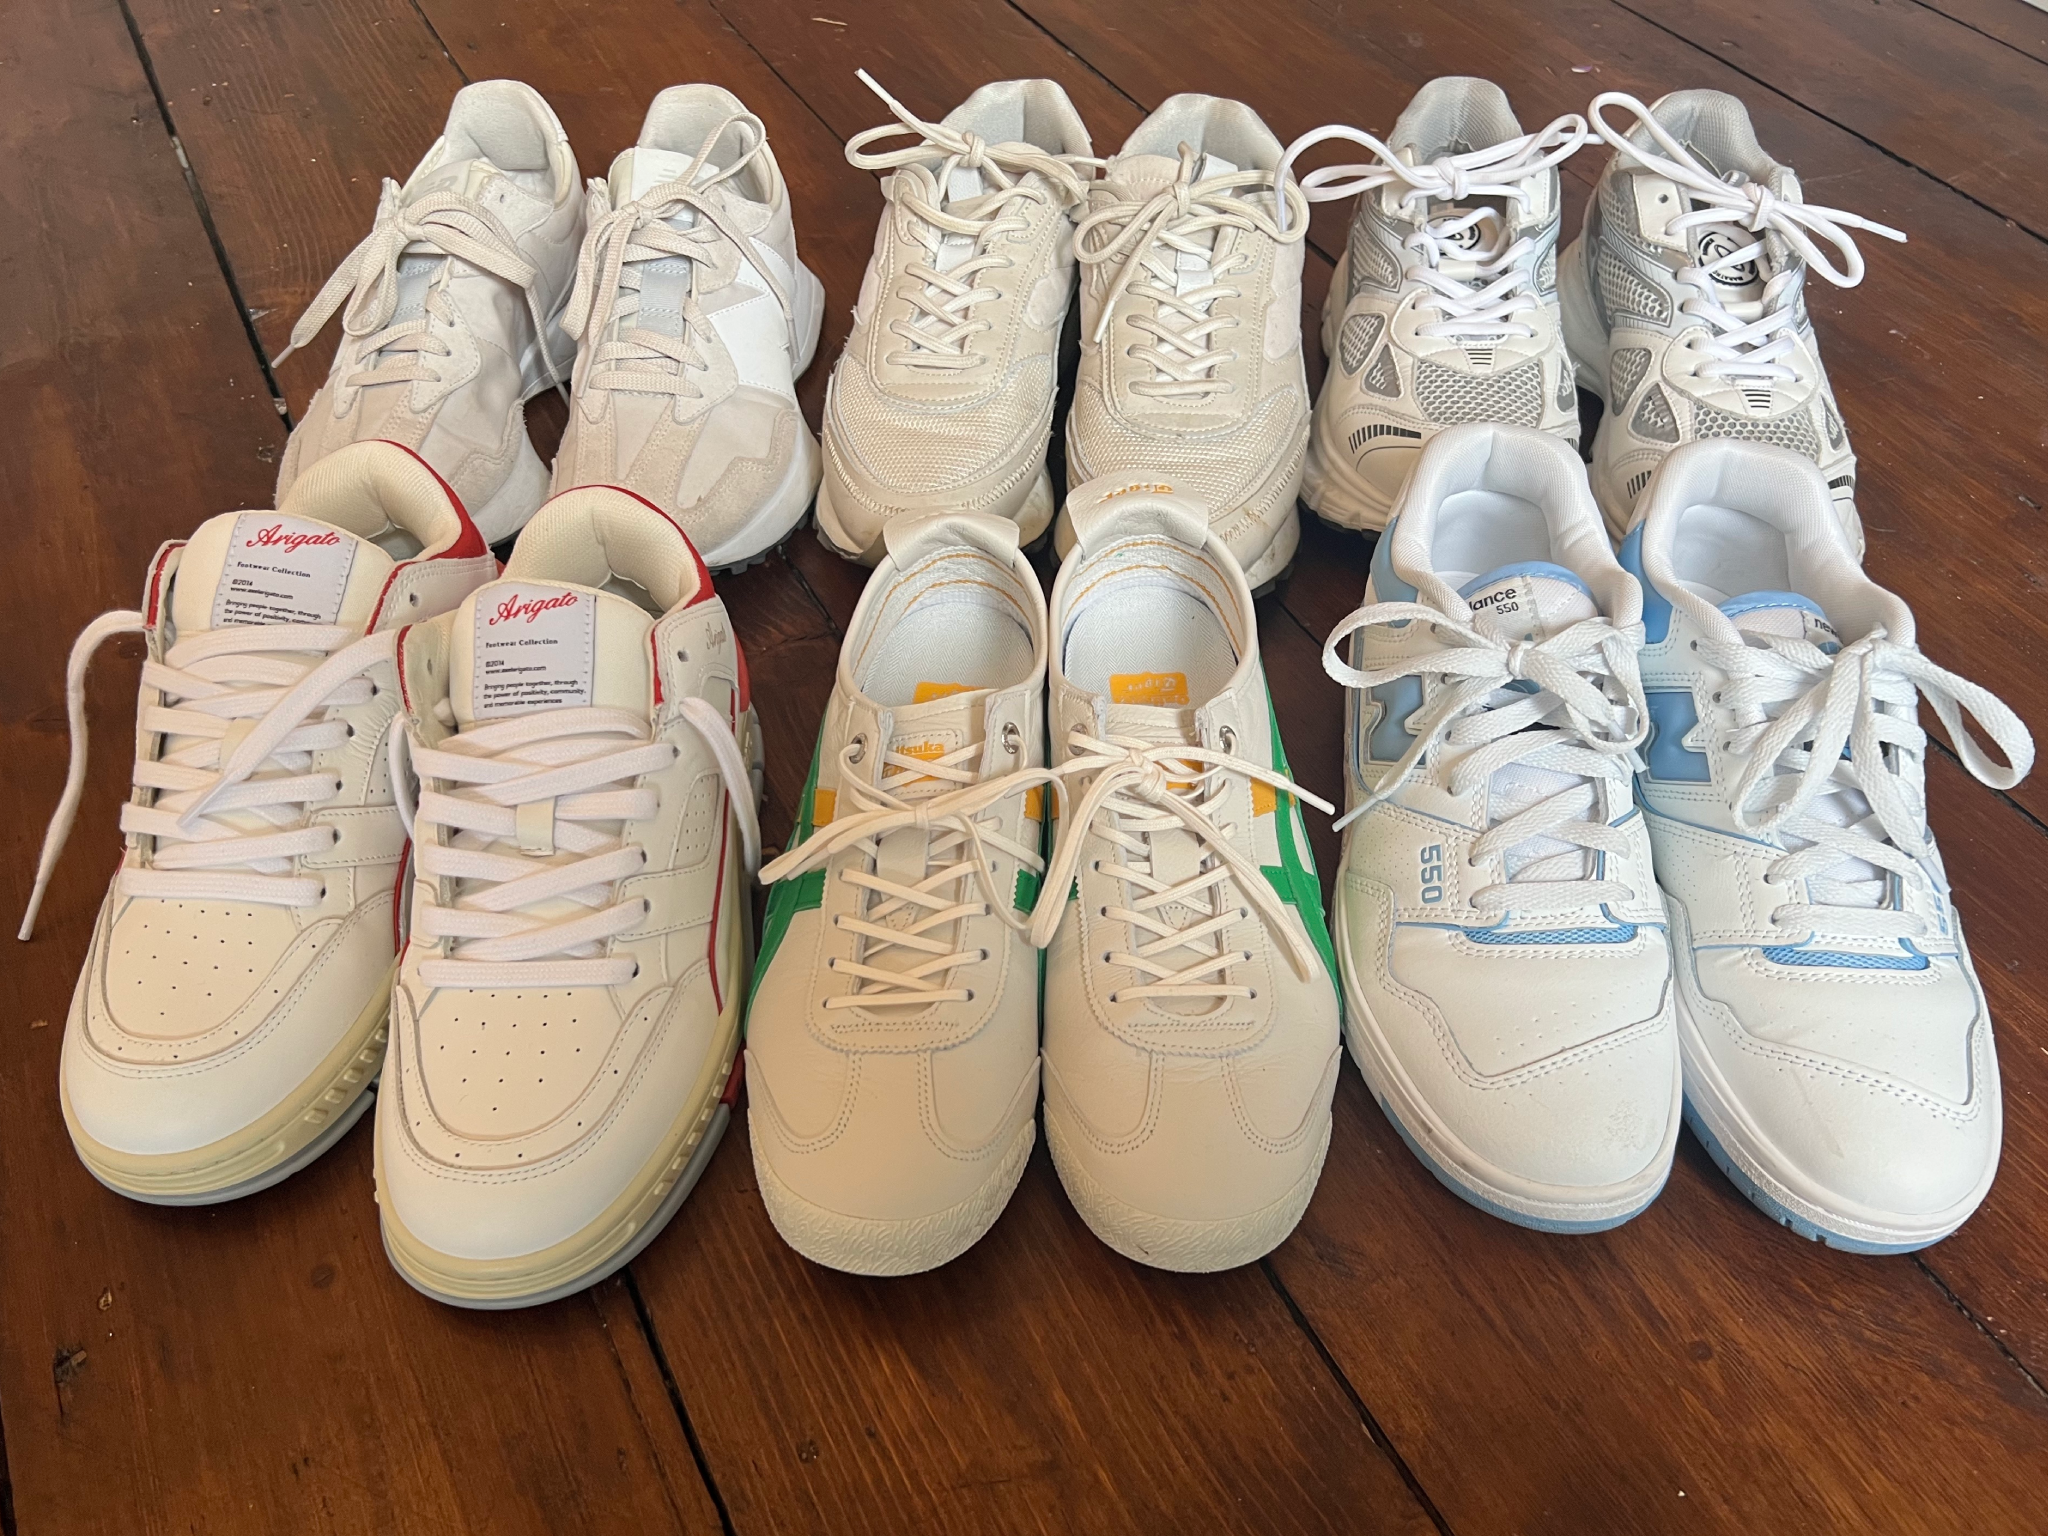 A selection of the white trainers we tested for this review